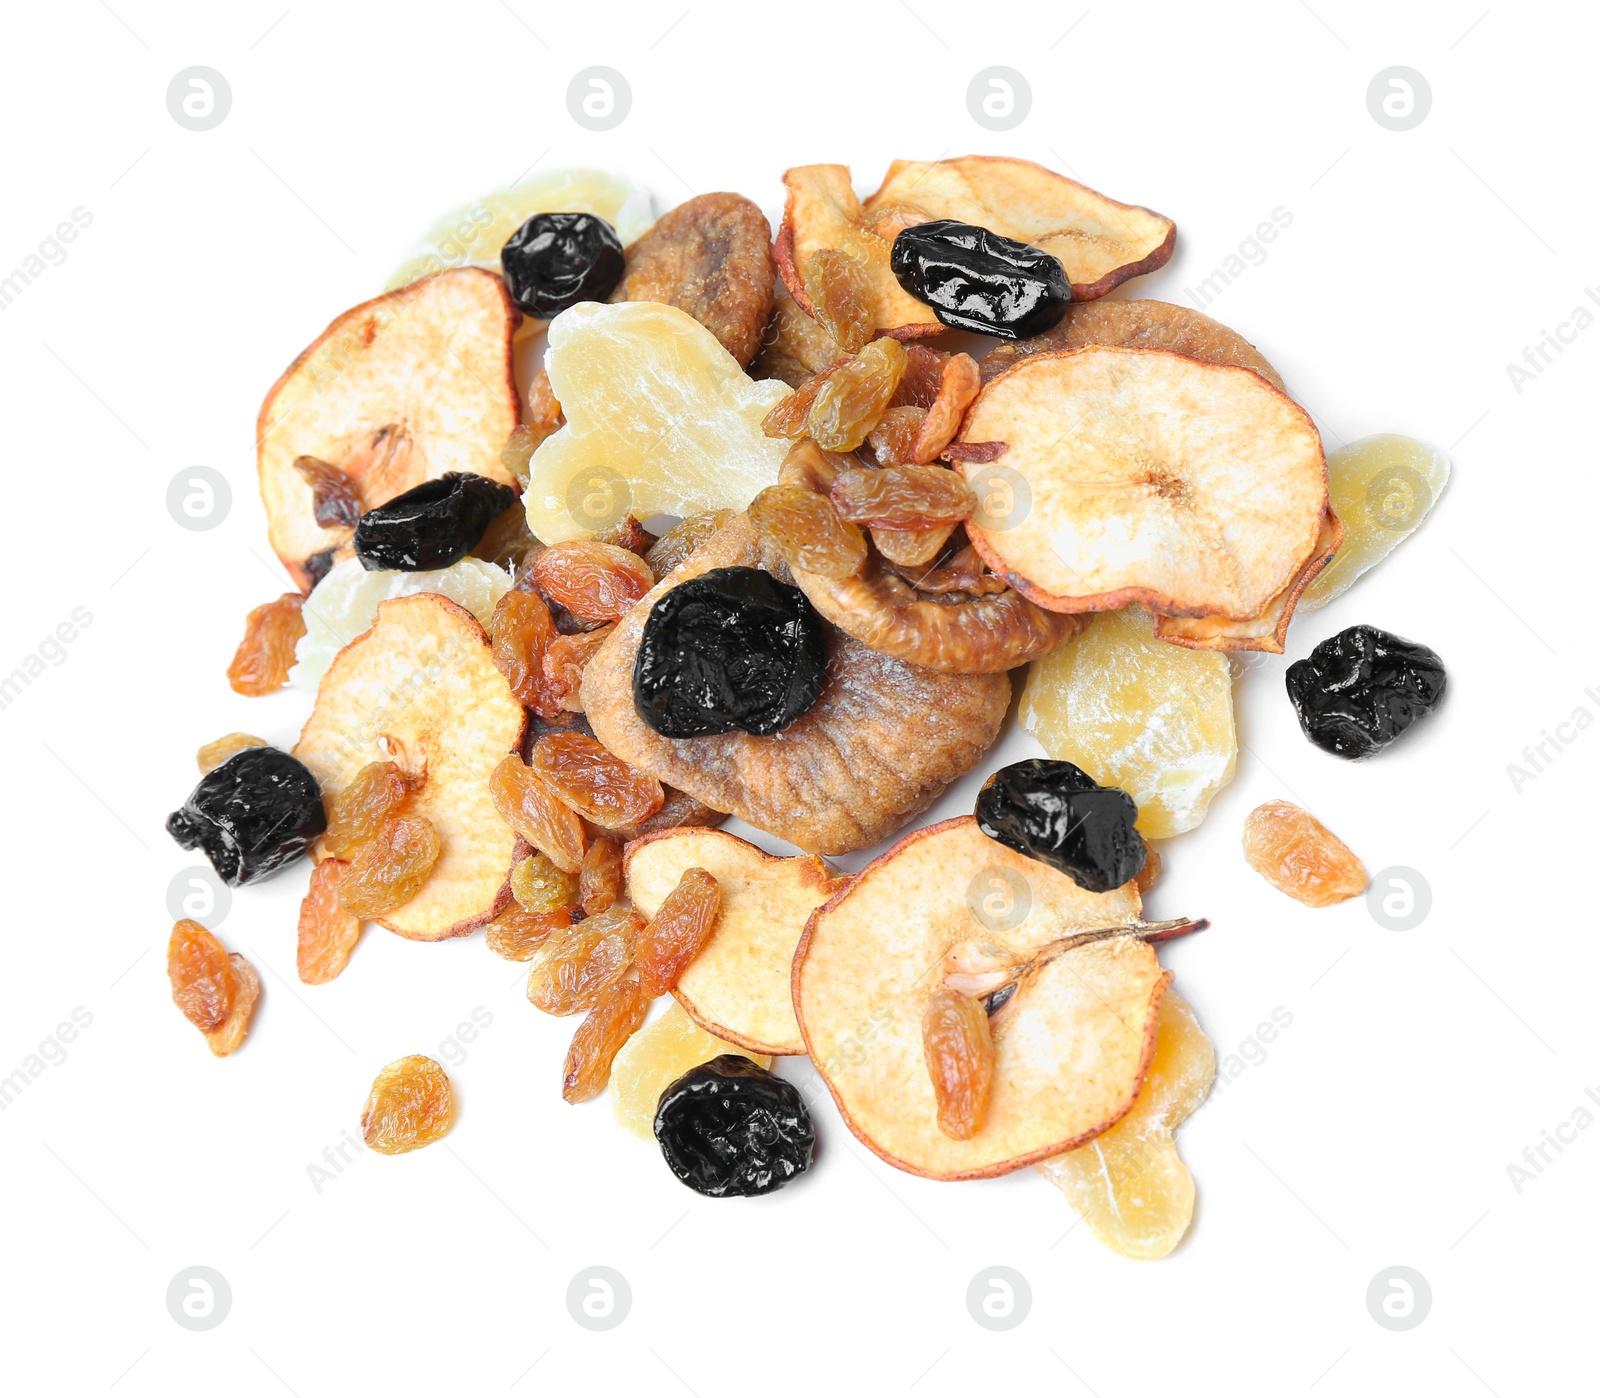 Photo of Pile of different tasty dried fruits on white background, top view